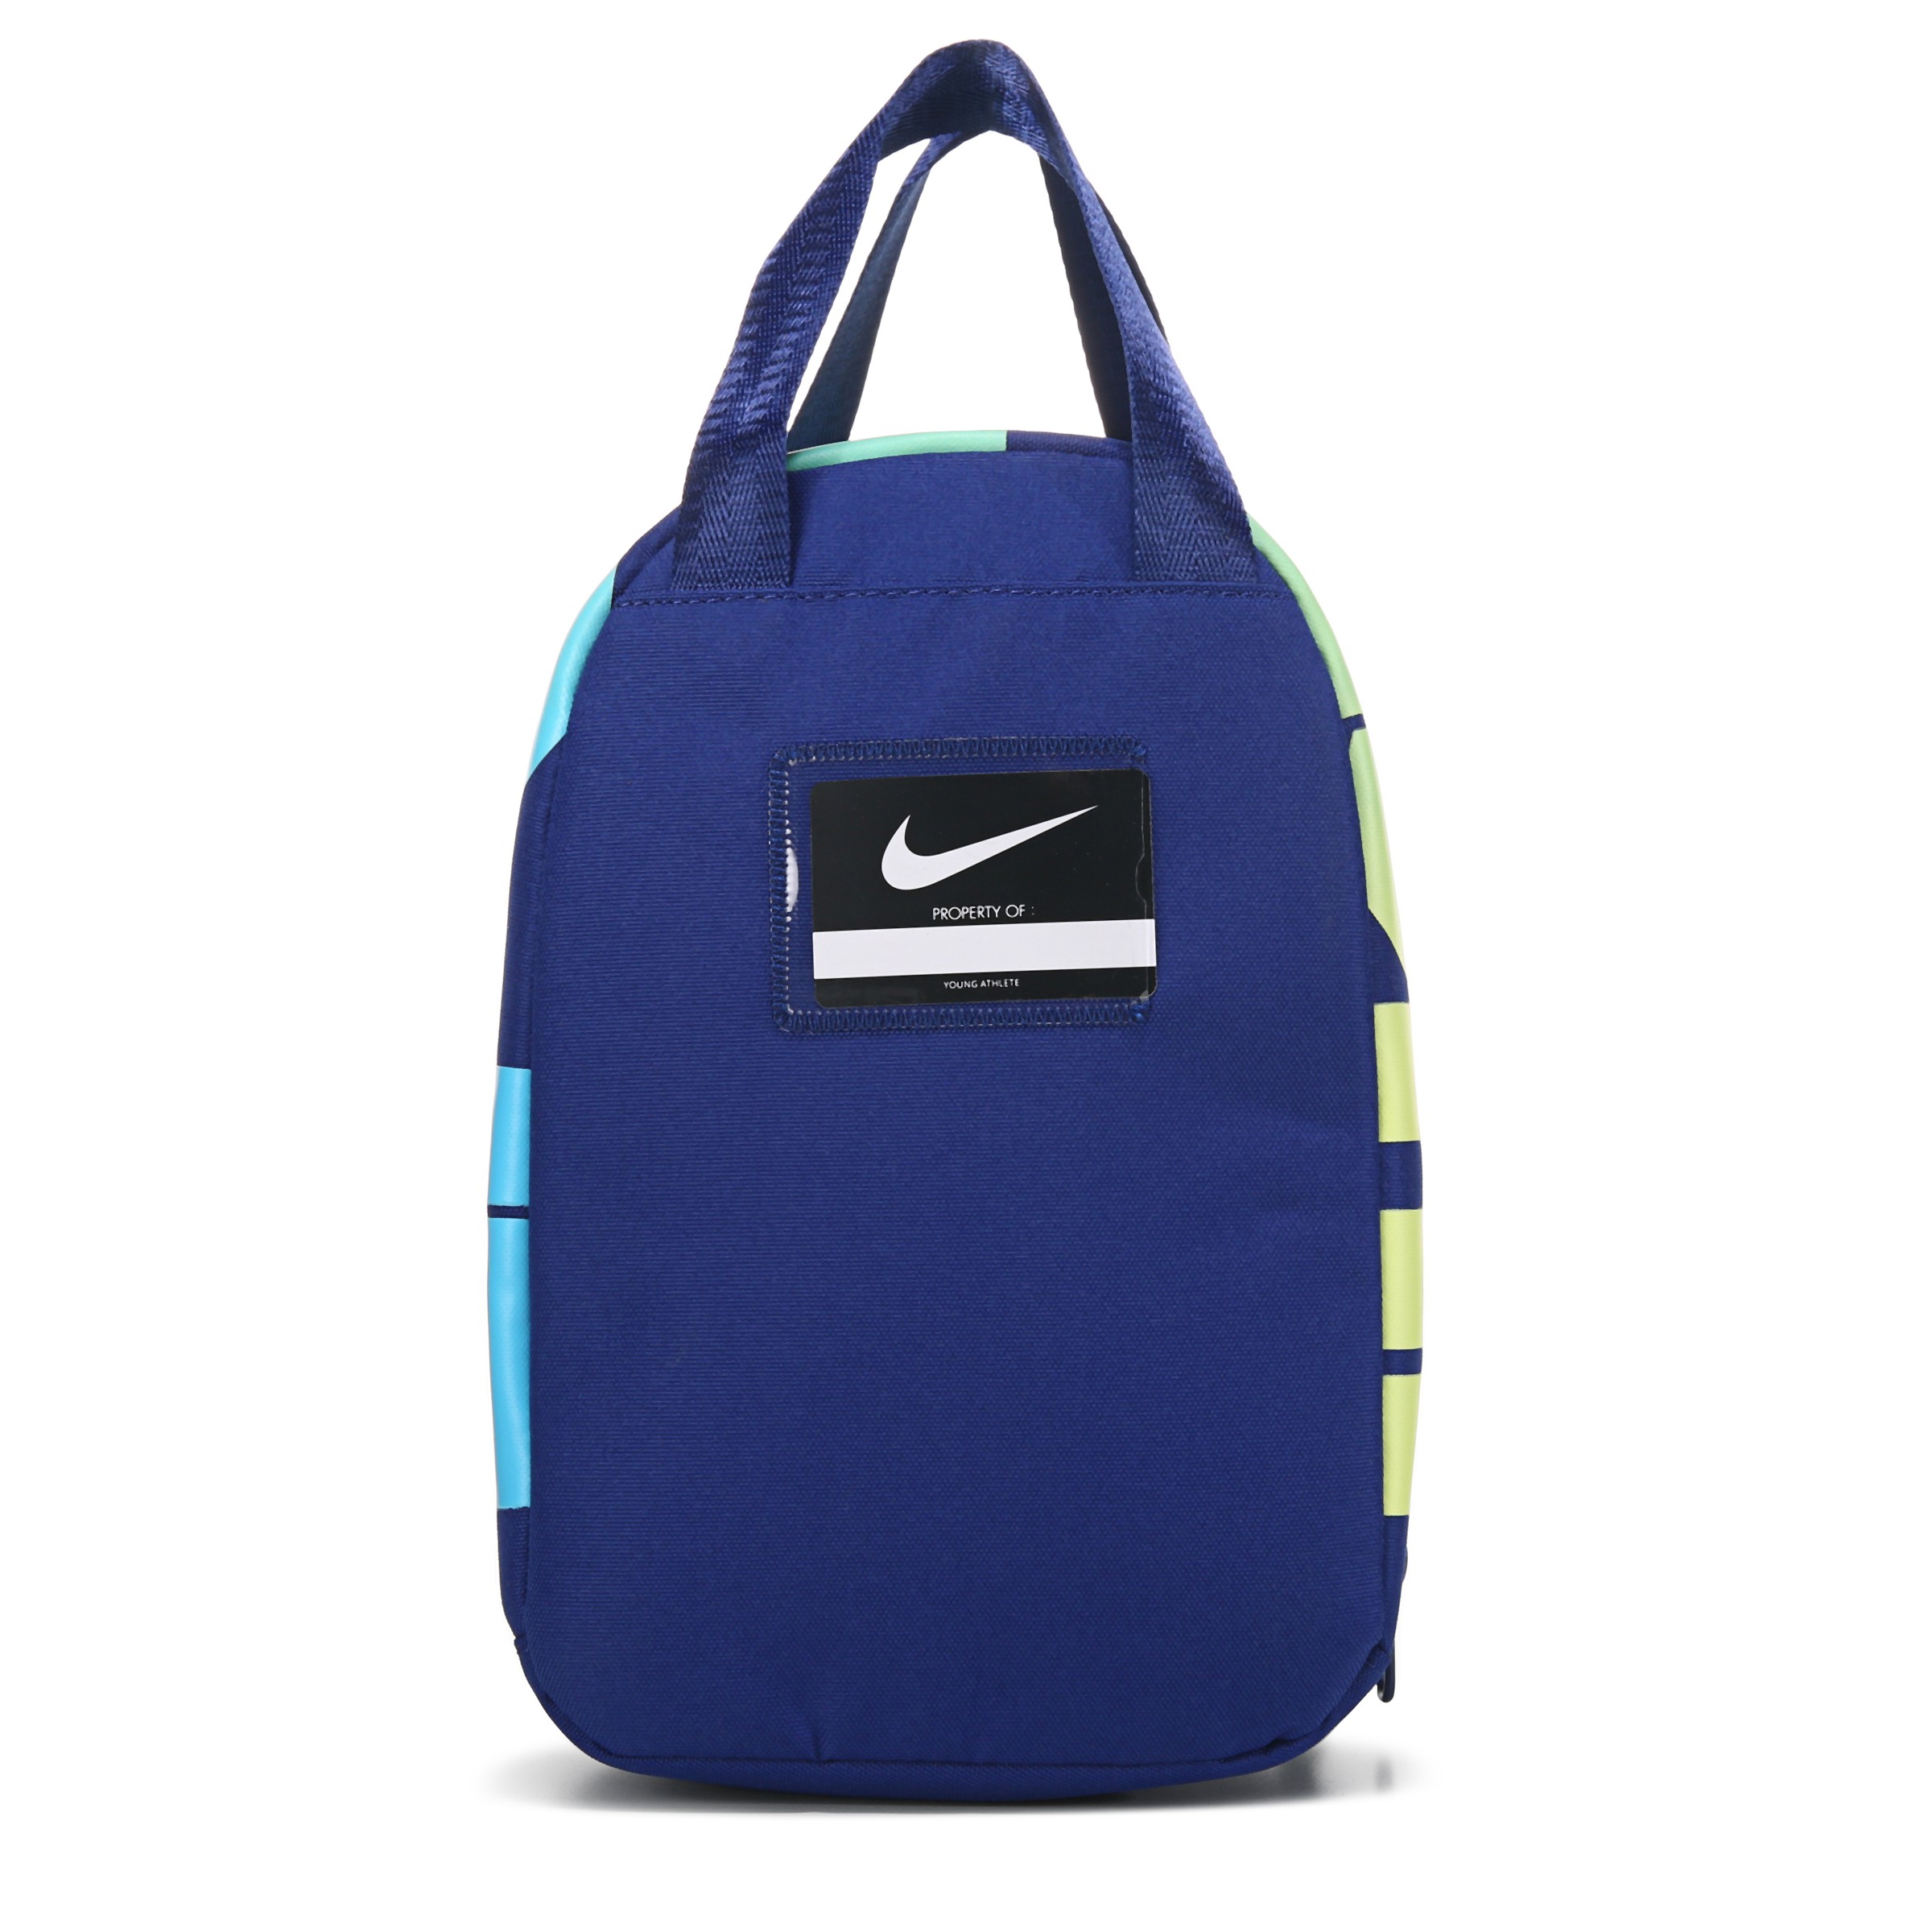 Nike Just Do It Fuel Pack Lunch Bag